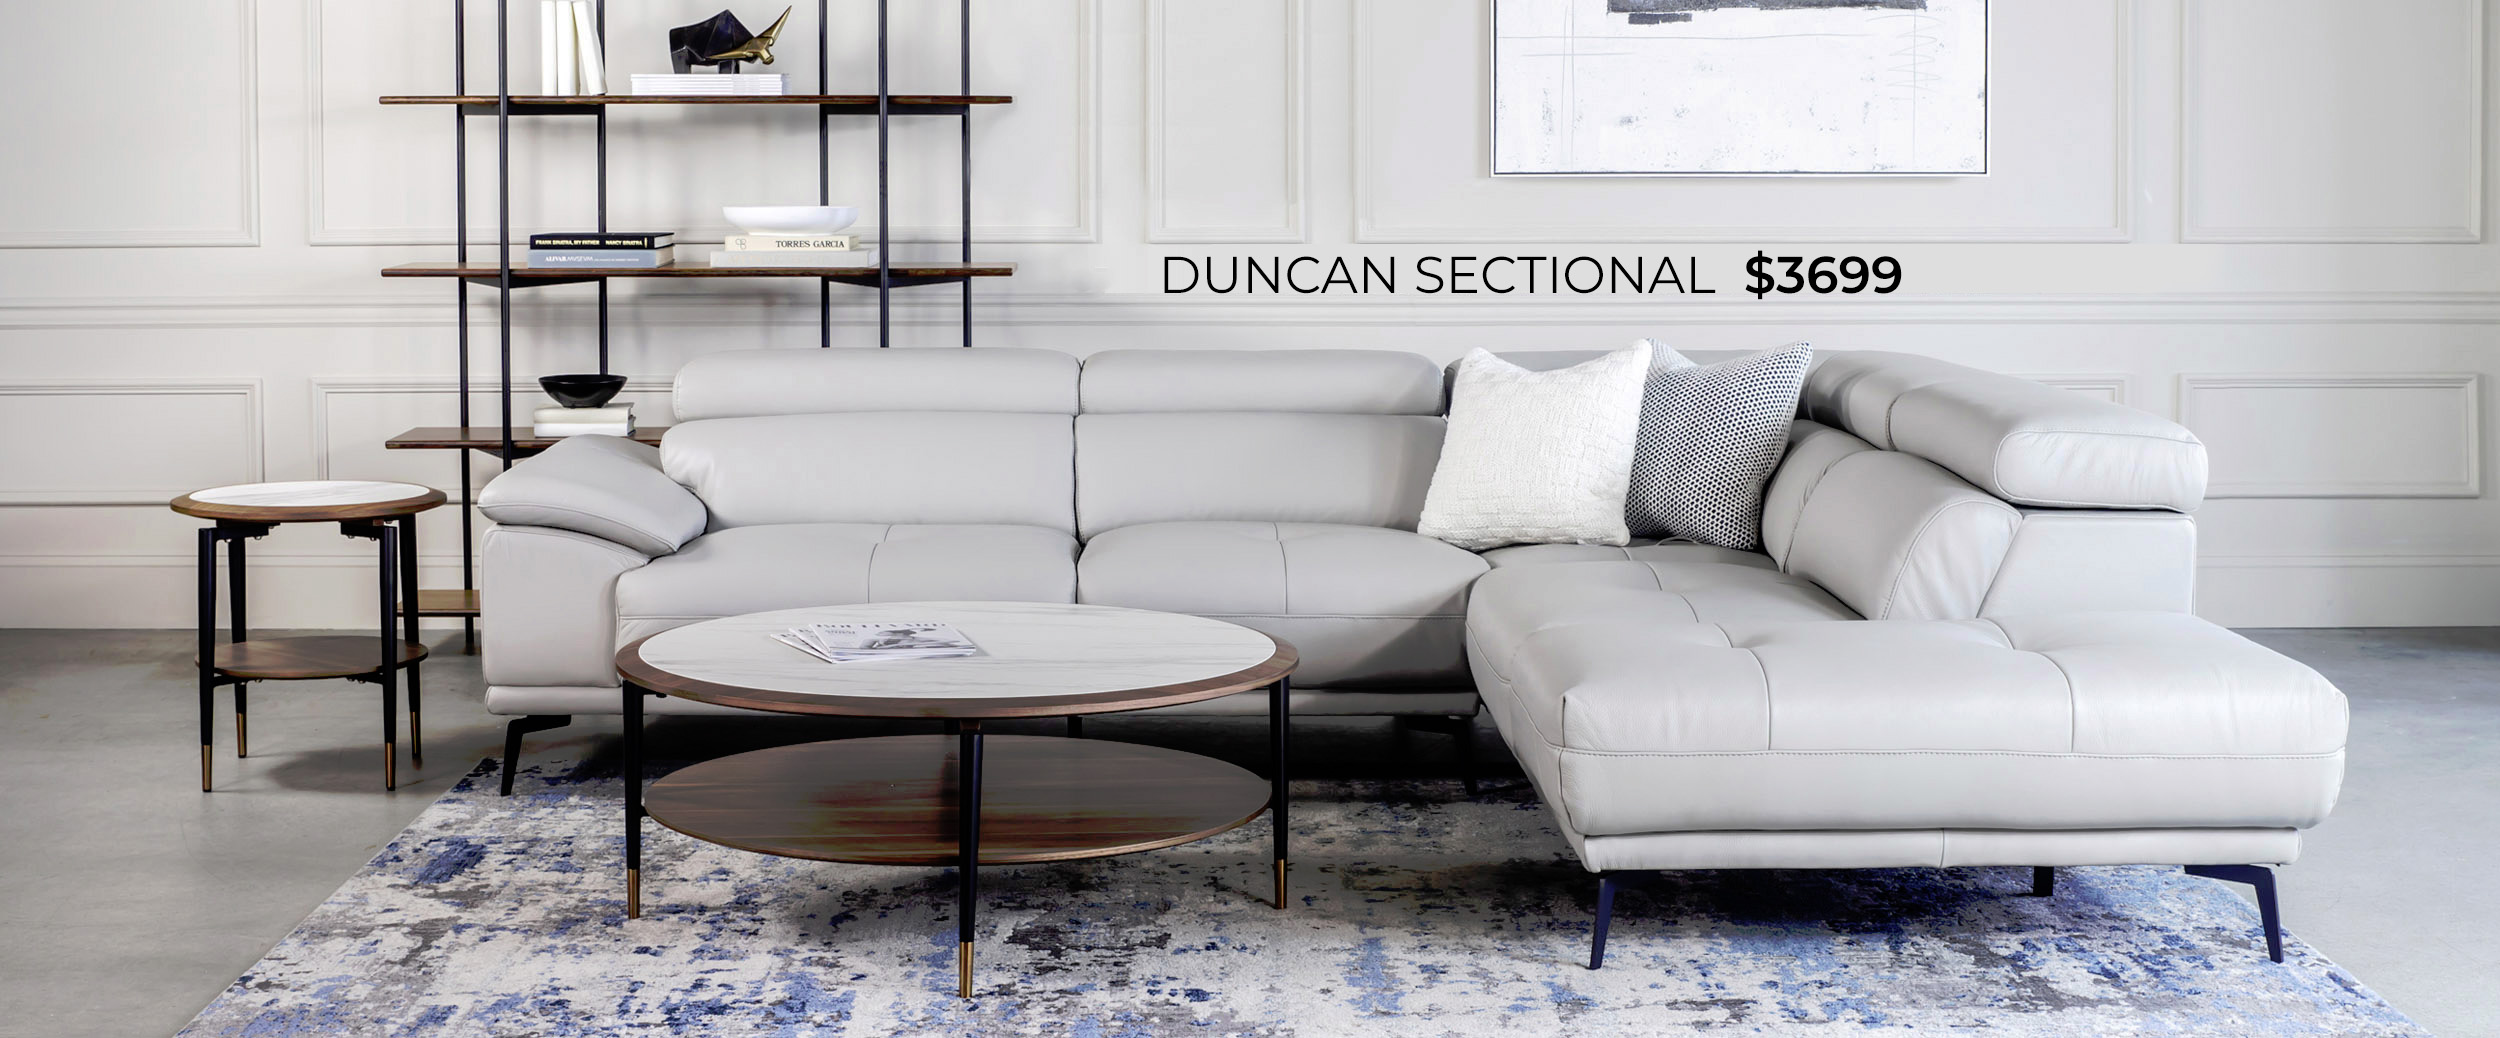 Duncan Sectional in Silver